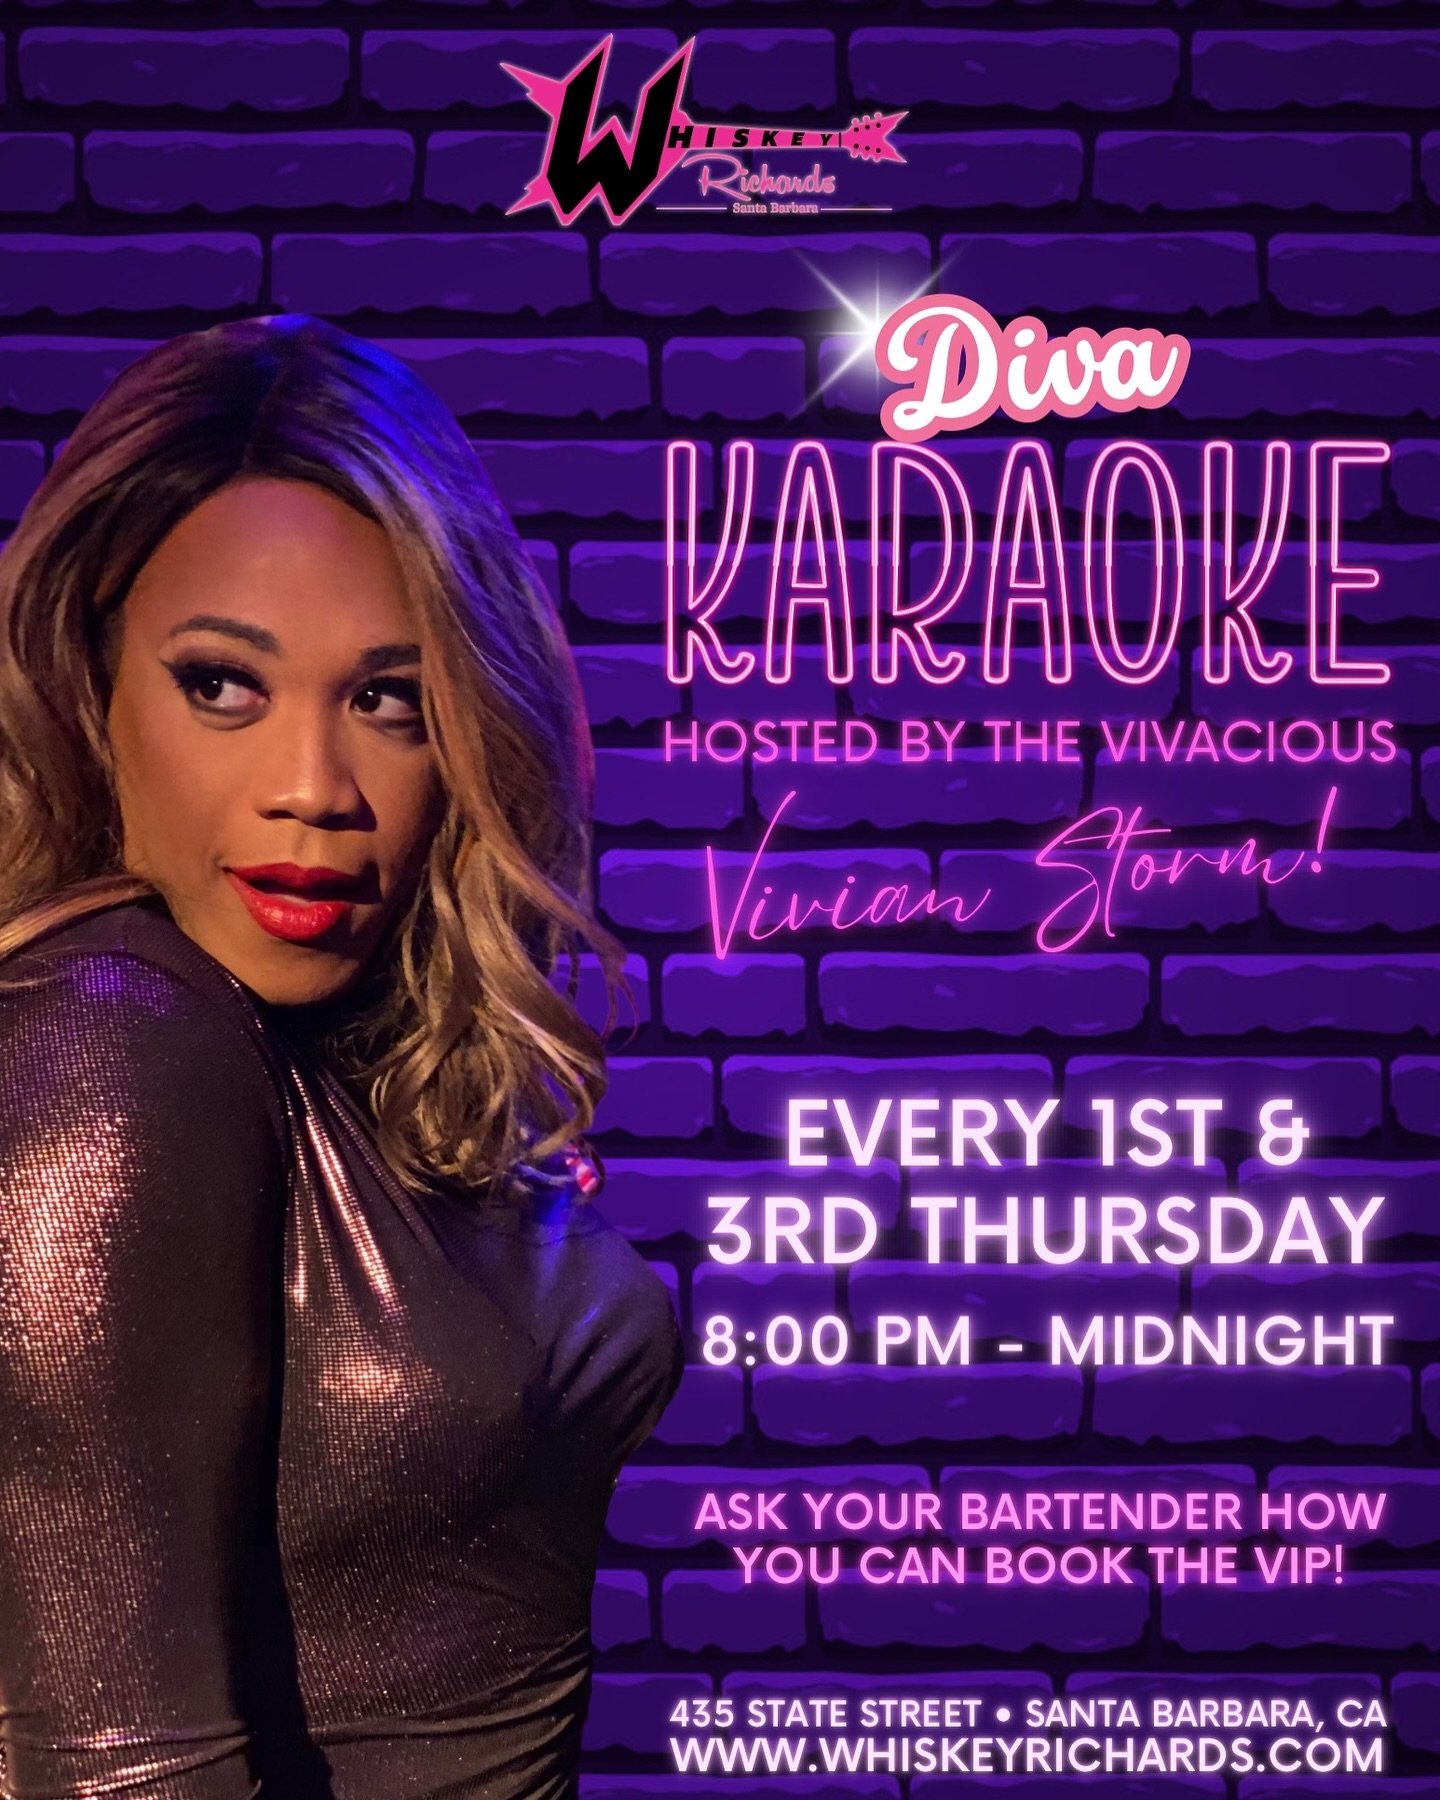 WhiskSHE Richards just got a bit more fabulous&hellip; Diva Karaoke will now be hosted twice a month, starting Thursday at 9 pm! Get ready to unleash your inner diva at Diva Karaoke hosted by the fabulous Vivian Storm! Join us at Whiskey Richards for